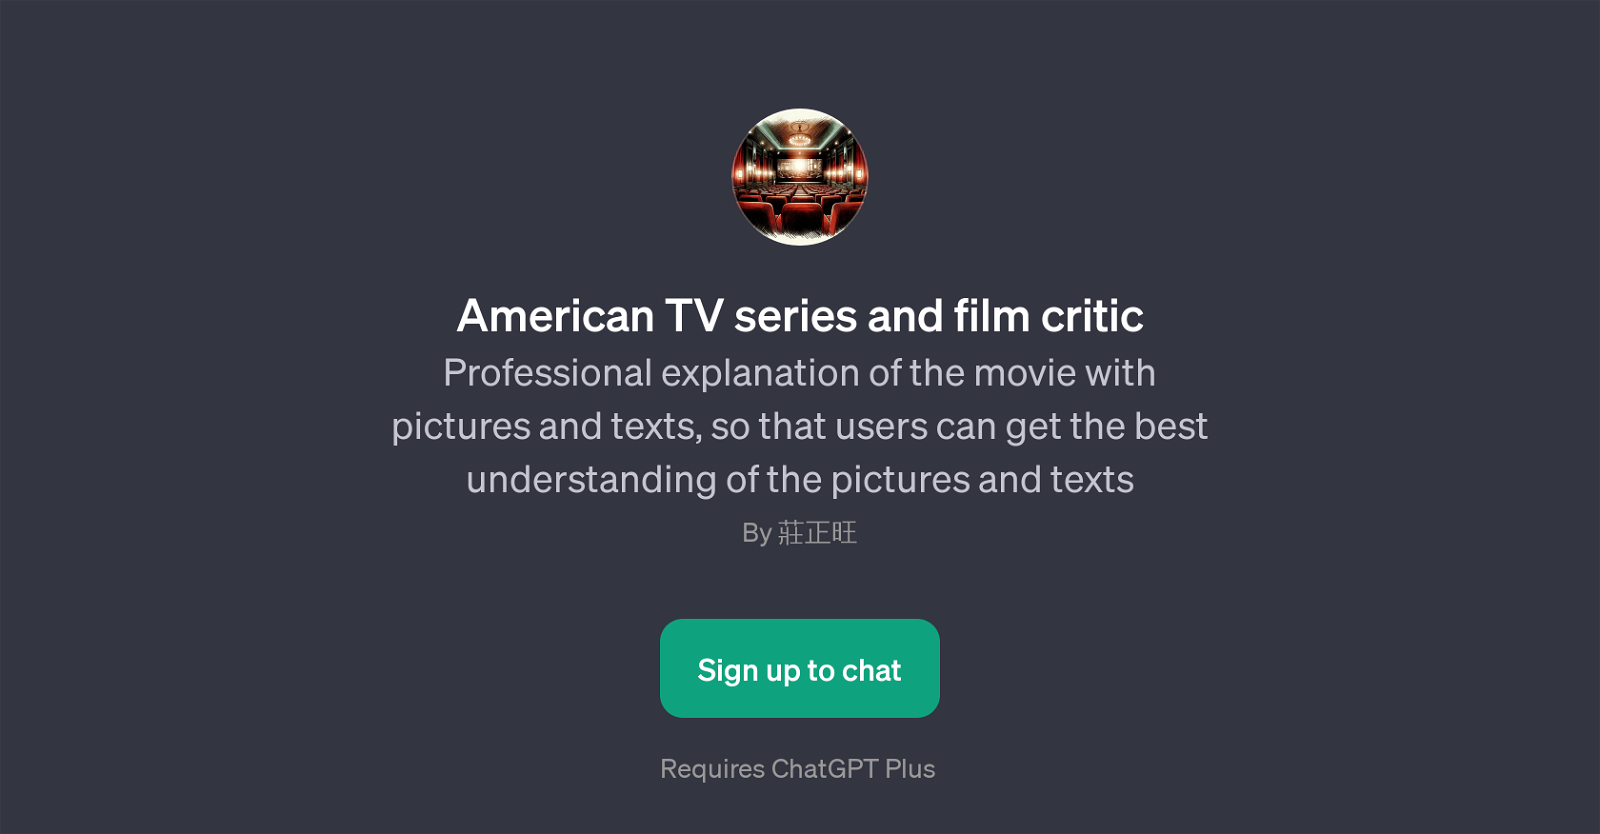 American TV series and film critic website